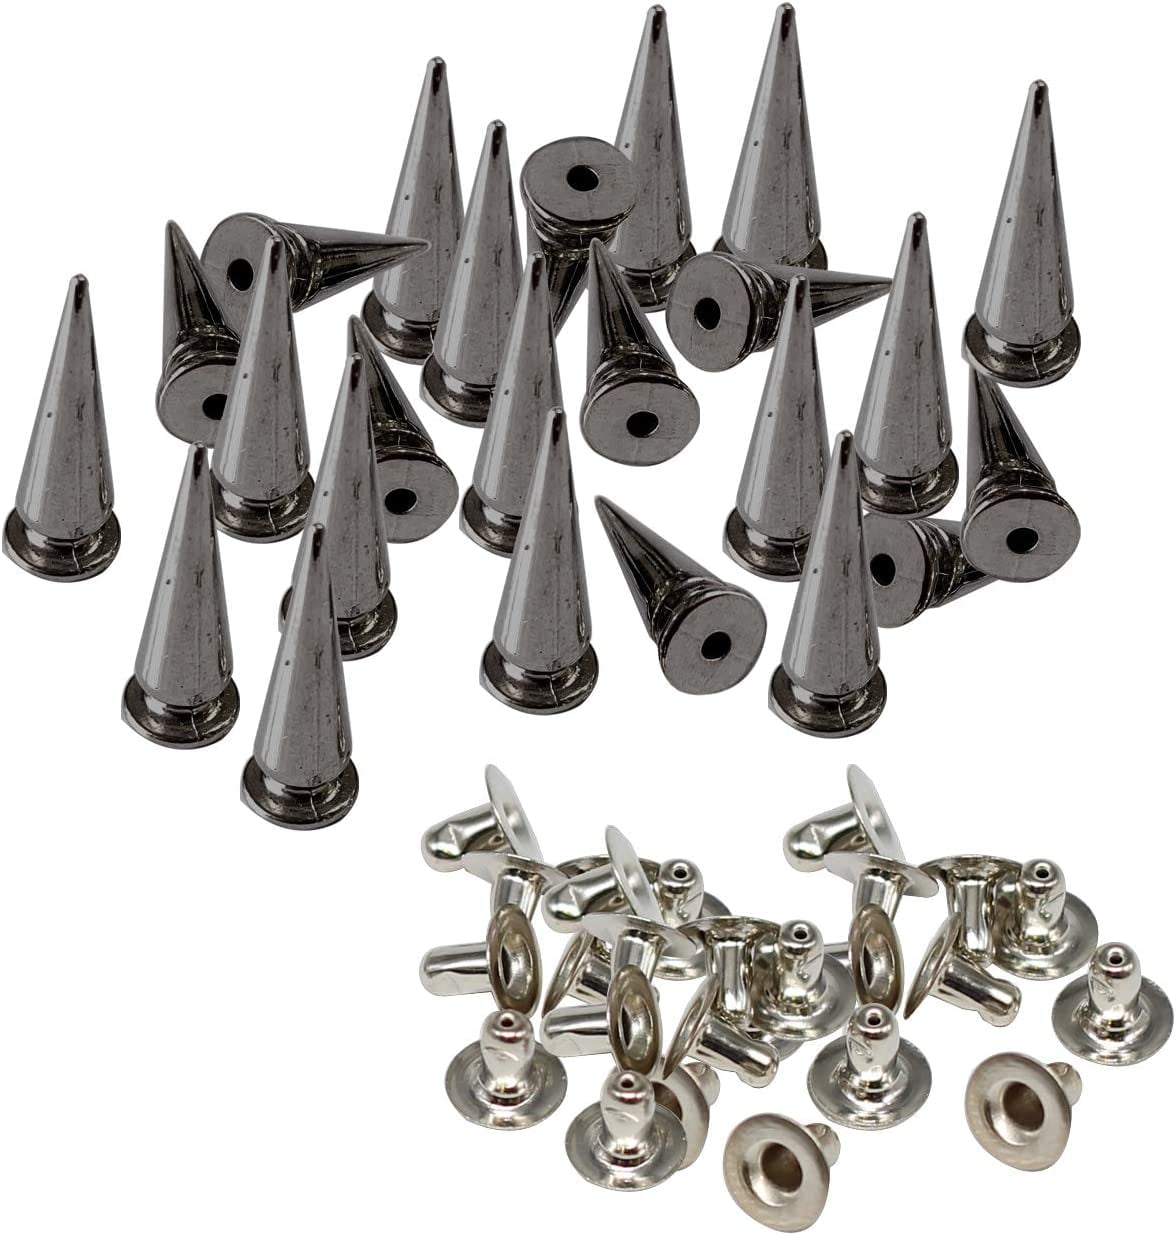 240 Sets Cone Rivets 7mm Size Double Cap Punk Cone Studs 4Colors Brass  Rivet Kit with Setting Tools for Leather Craft/Bags/Jacket/Design  Sample/Metal